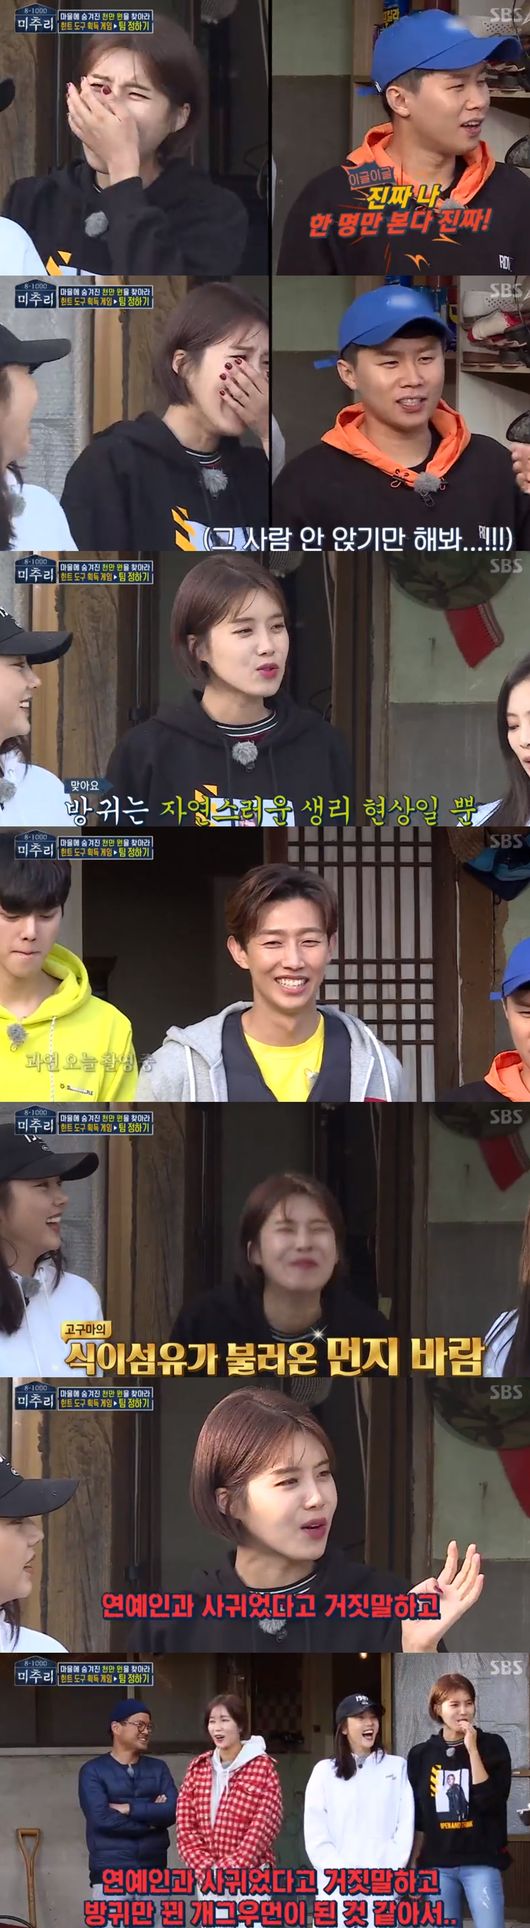 Son Dam-bi Competition)The entertainment of the more interesting members than the reasoning gave a big smile.SBS 6-part pilot Michu and 8-1000 was first broadcast on the 16th.Yoo Jae-seok, Black Pink Jenny, Kim Sang-ho, Im Soo-hyung, Jang Doyeon and othersIs a 24-hour rural mystery entertainment that tracks the mysterious secrets hidden in rural villages.Jenny smiled at the crew, Ive never lived in the country before - what do I do? What if Im a civilian?When Jenny appeared, Yang Se-heeong added a laugh as she spoke to stand next to him.Yoo Jae-seok demanded that everyones bag be returned and said, All cookies are confiscated.The members then arrived at the hostel.Yoo Jae-seok explained the mission to the members: We had to find the money cloth hidden in Michu and the items that the members had in advance were hints that helped us find cloth cloth cloth.If you find a thousand if you can take it completely without distributing it with your agency.Self-sufficient lunchtime: Son Dam-bi dug vegetables in the field and asked Songgang, What do you want to do if you have a thousand if you have one? Songgang replied, I want to eat beef.Kim Sang-ho and Jang Doyeon went to pick up sweet potatoes and found a hint red stone in the field.Kang found a red stone while fishing in the river, tricking other members into taking the red stone, saying he had left his watch, and then snuck it up.It contained an elevator opening button.But the other members were watching Kangs actions. Im Soo-hyang and Jenny also got red stones from the river.Kang Ki-young said, But I used it in a very stupid and public place. I can only get any hints...Jenny, who had already packed the bread, found the toaster in the kitchen and found a hint: the word H O T was written on the baked bread.After lunch, the game for hint tools began: Before the game, Yang Se-heeong continued to tease Jang Doyeon with a fart, laughing.Jang Doyeon said, I will show you my pants popping in the morning tomorrow morning.Son Dam-bi, a team that played a domestic volleyball but did not continue to play with Jang Doyeon, who had no Exercise nerves, Explosion.Yang Se-heeong laughed when he said, Is this Sister crazy for a thousand if. Jang Doyeon was a volleyball hero.Yoo Jae-seok also said, Exercise really cant do it.After a close race, Yang Se-heeong Jang Doyeon Son Dam-bi Kim Sang-hos team won the salim volleyball; they said they copied Kang Ki-youngs hammer.Four mutual teams have won the hammer.